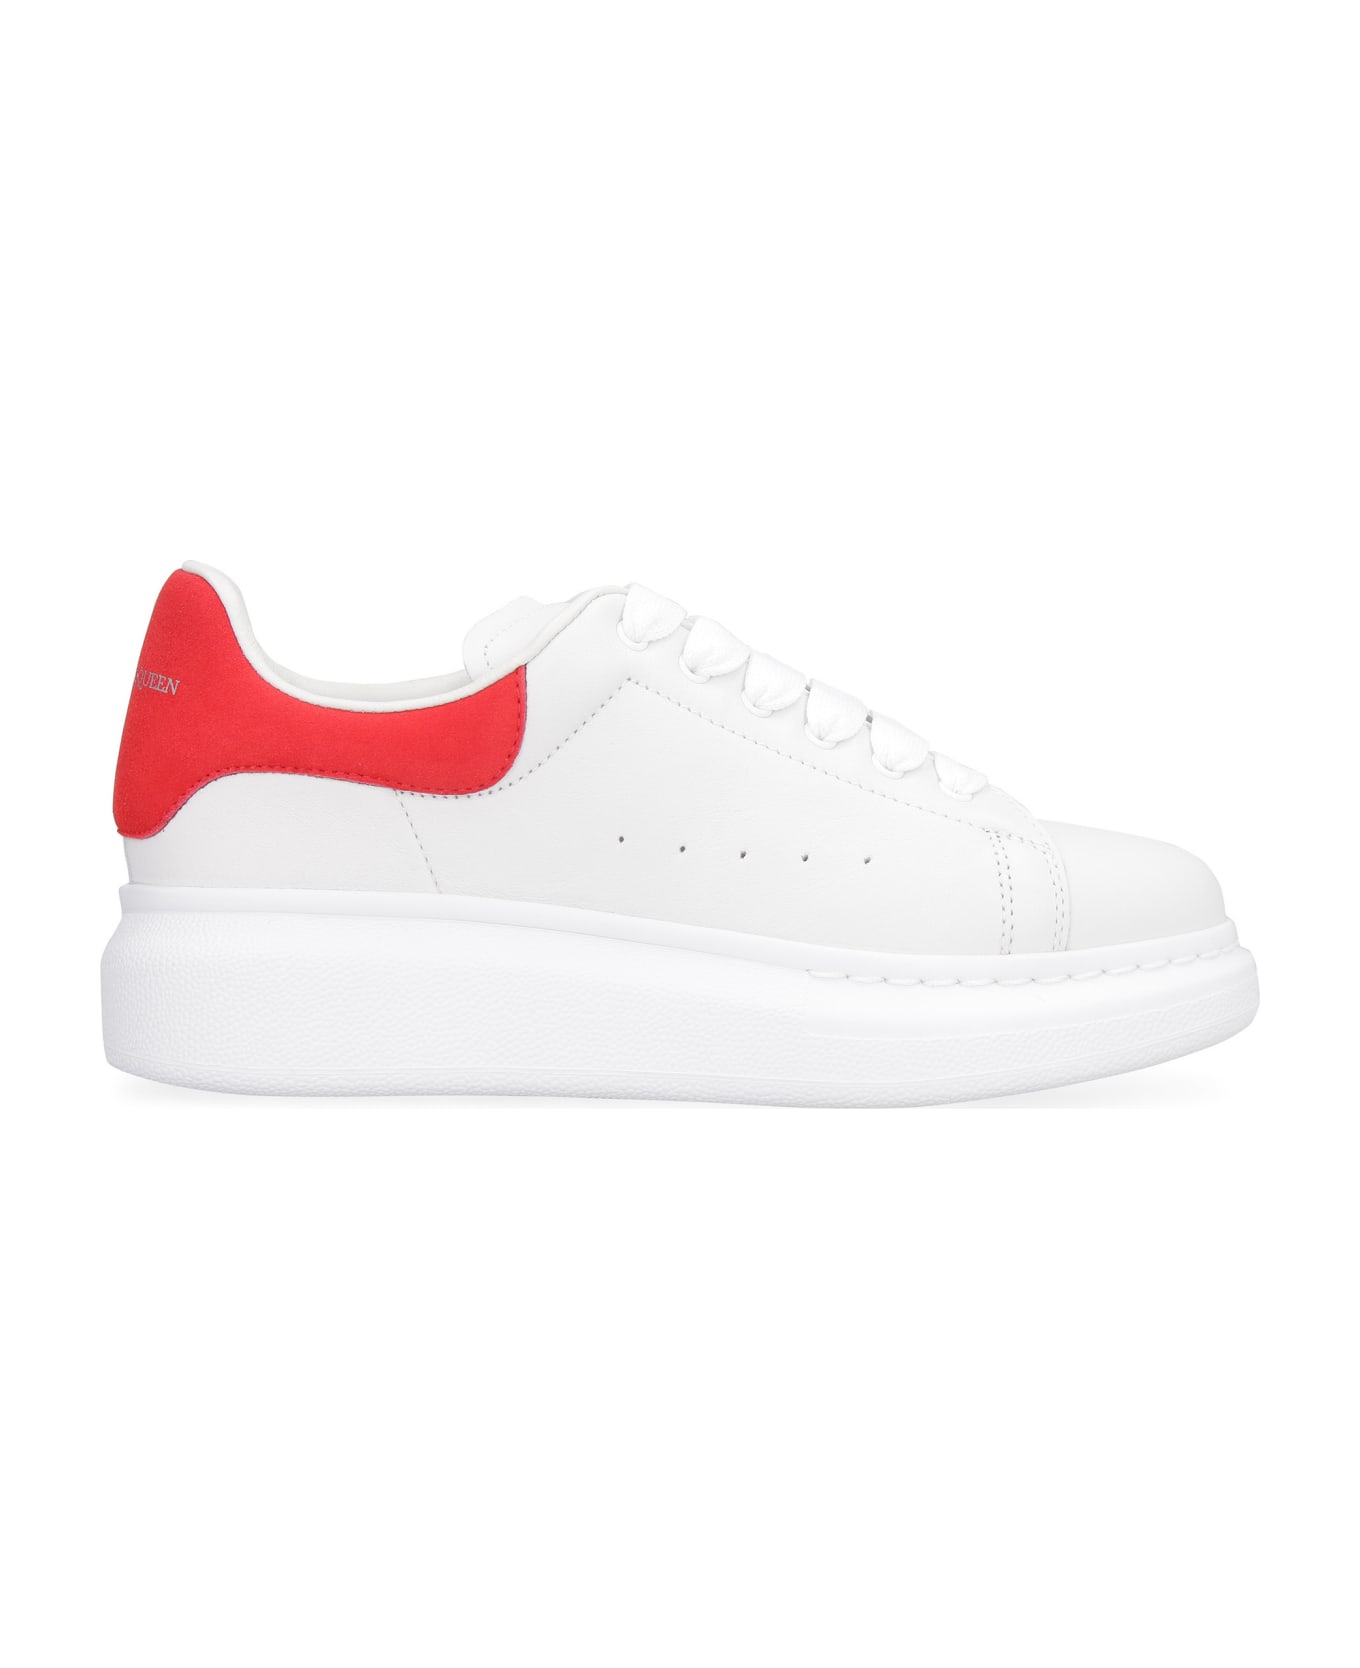 Alexander McQueen Molly Leather Sneakers - White